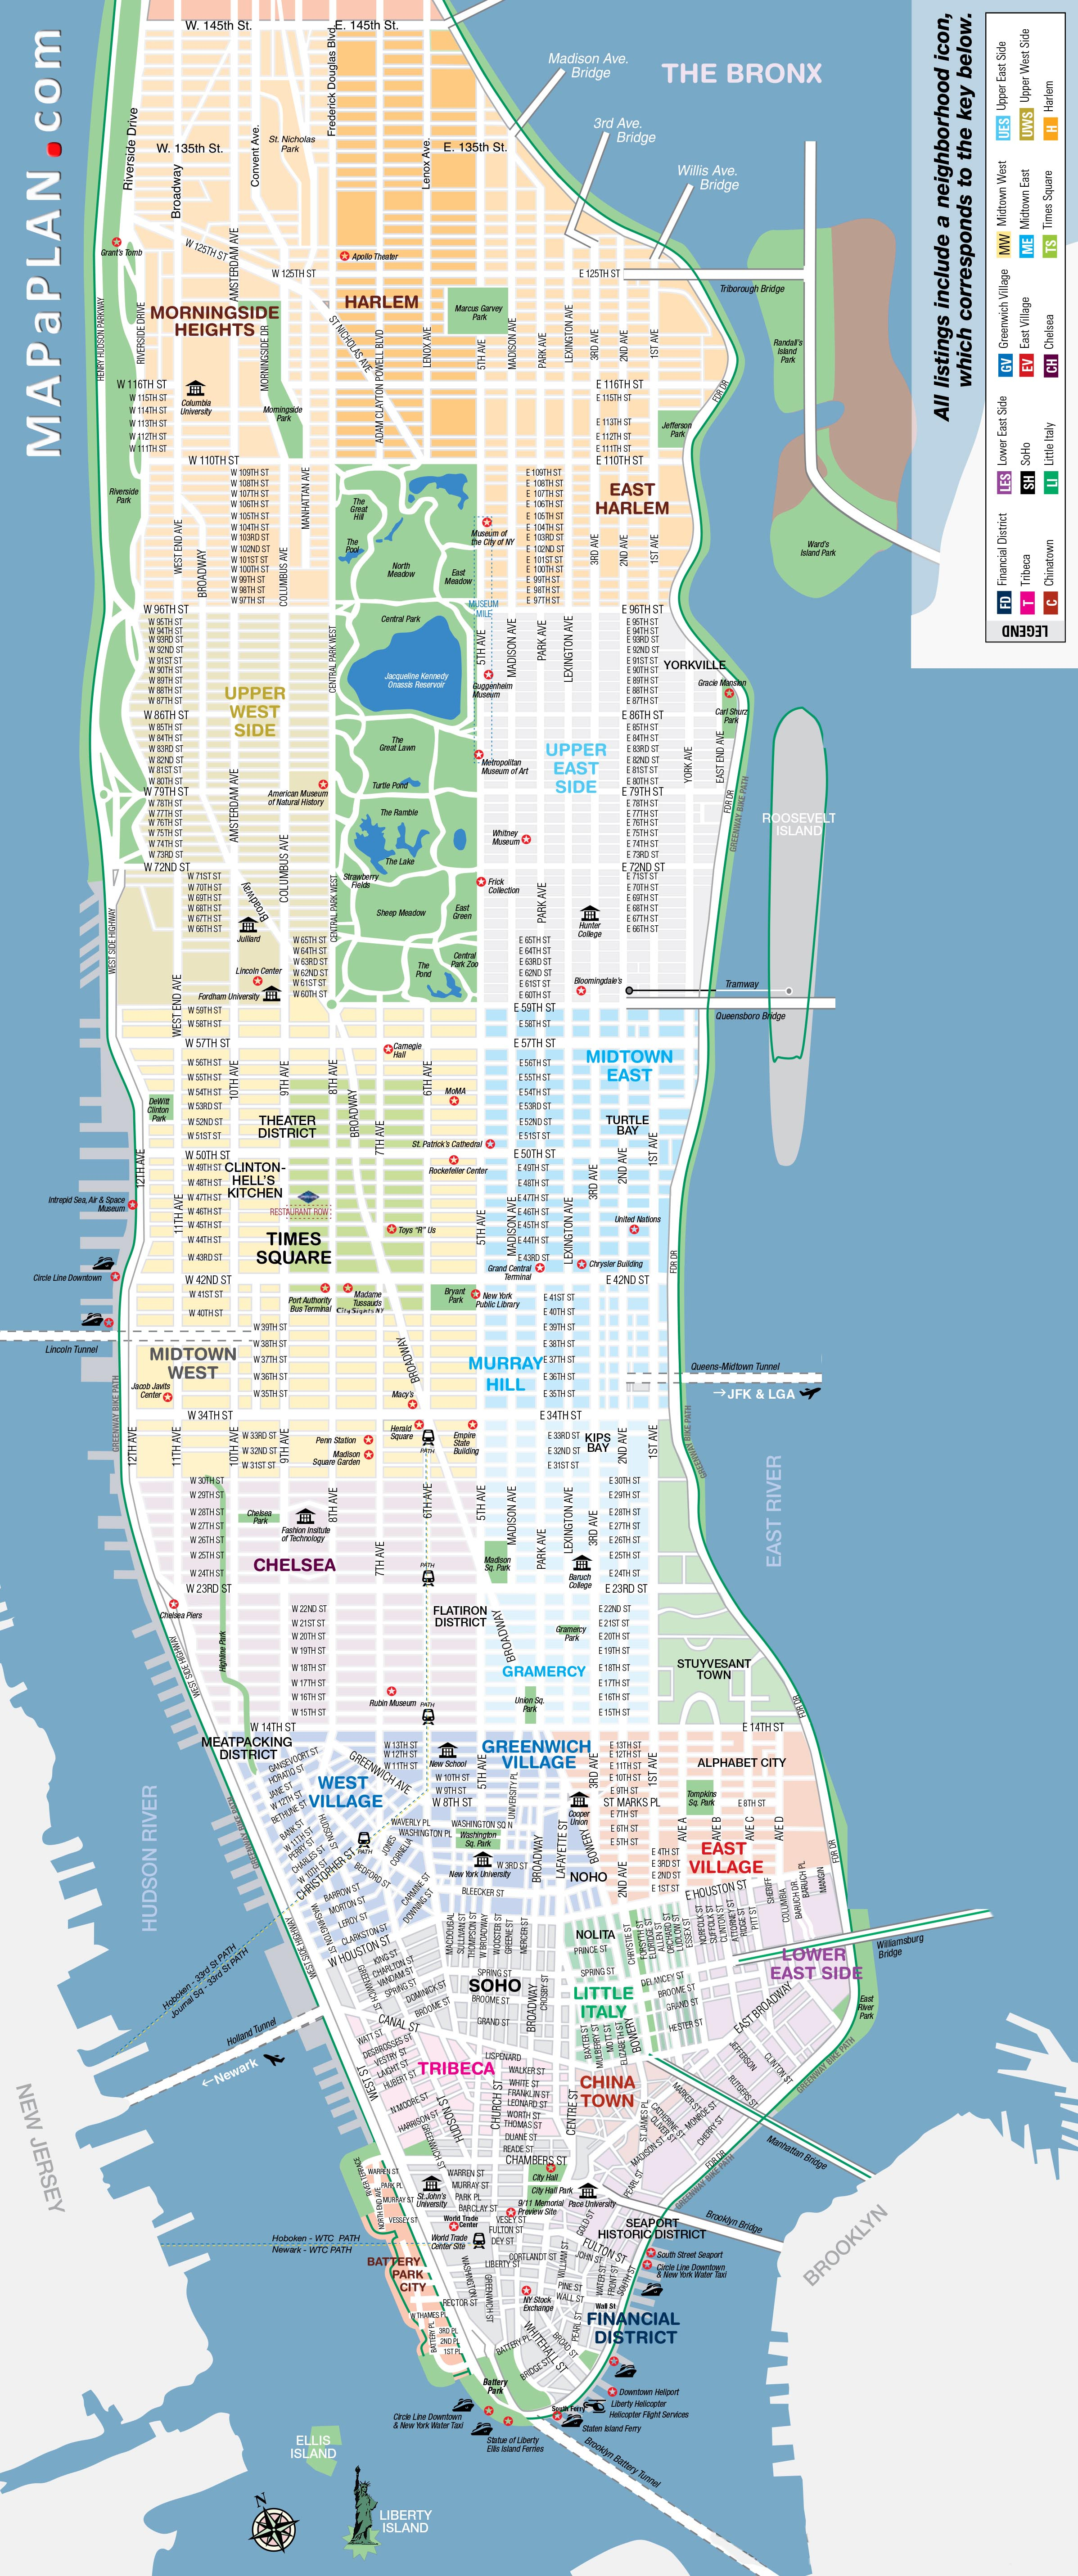 Maps Of New York Top Tourist Attractions - Free, Printable - Free Printable Map Of New York City